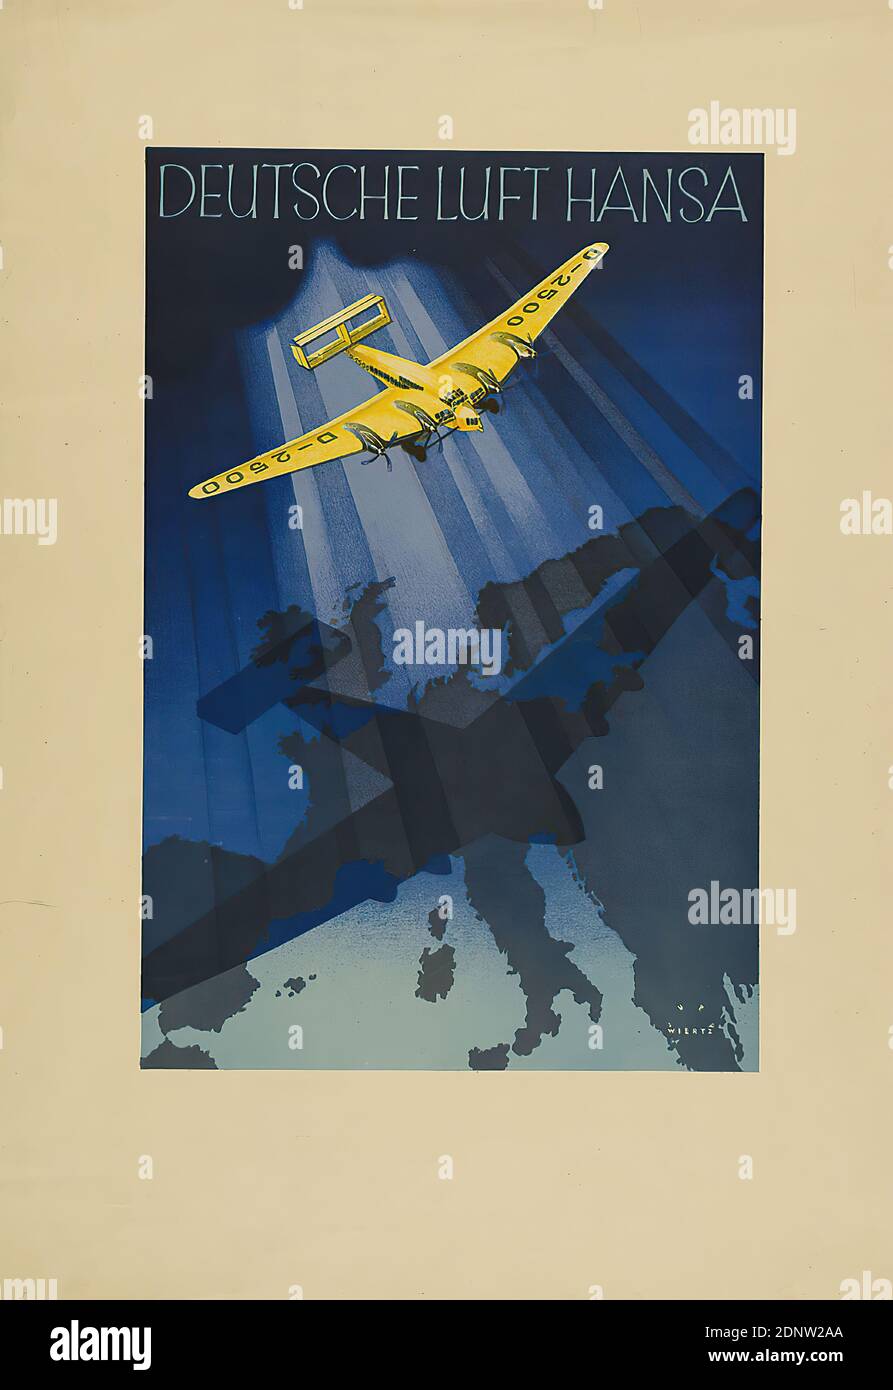 Jupp Wiertz, Deutsche Luft Hansa, paper, offset lithography, total: height: 59 cm; width: 41 cm, signed, in the printing form: JUPP WIERTZ, in lead: summer 1933, product advertising (posters), product and business advertising (posters), tourism posters, airplane, shadows, maps, atlases, earth, world Stock Photo